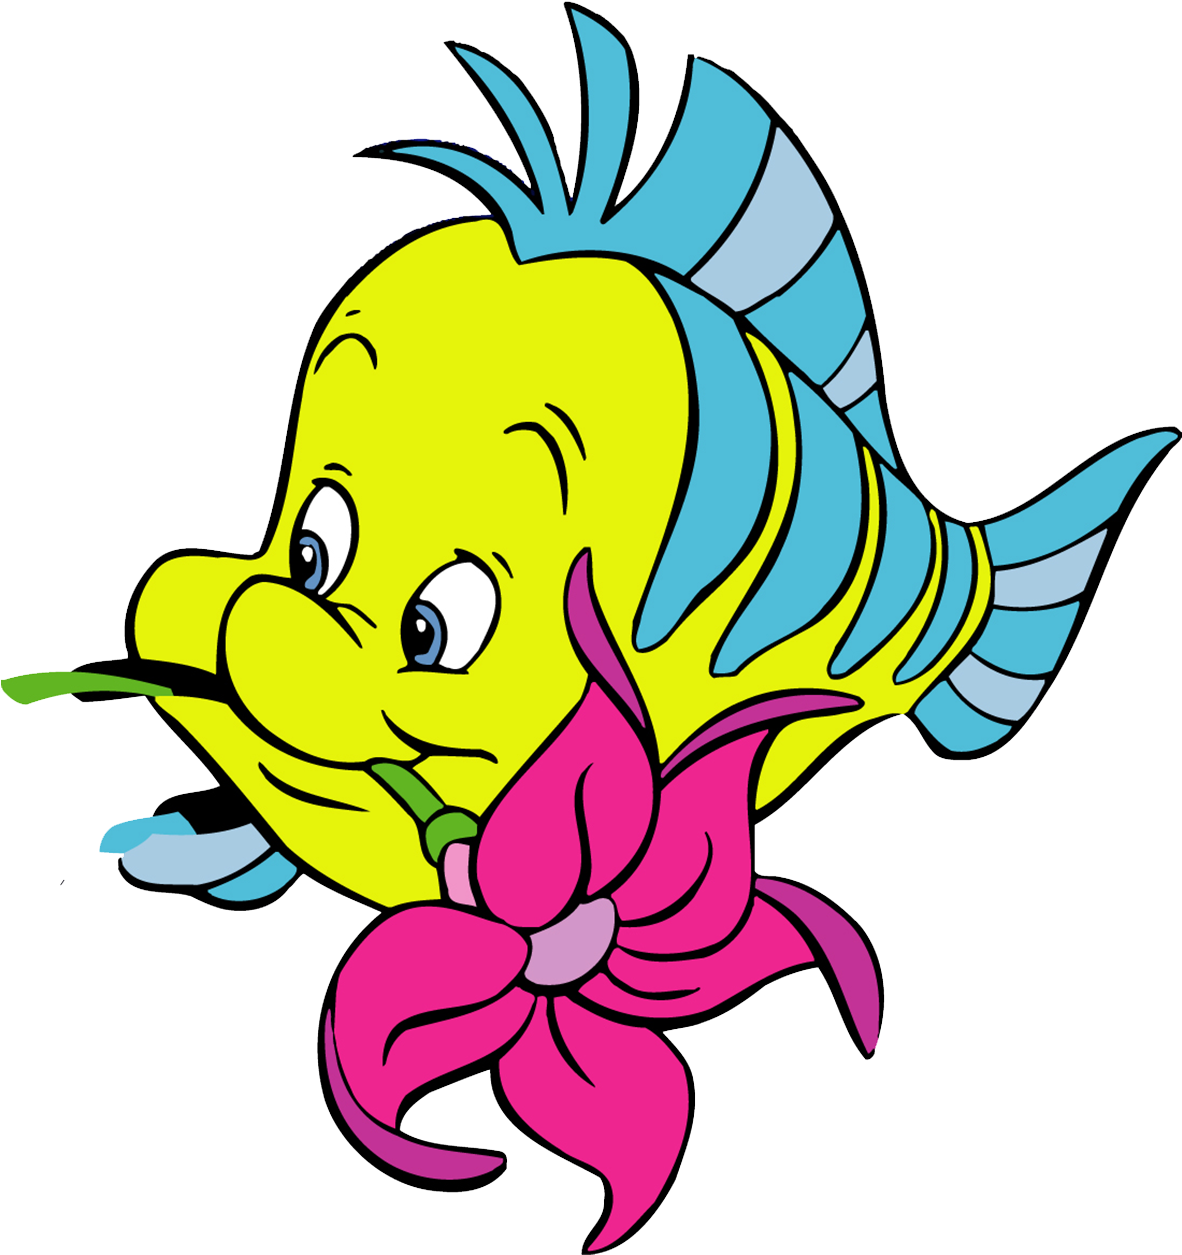 A Cartoon Fish With A Flower